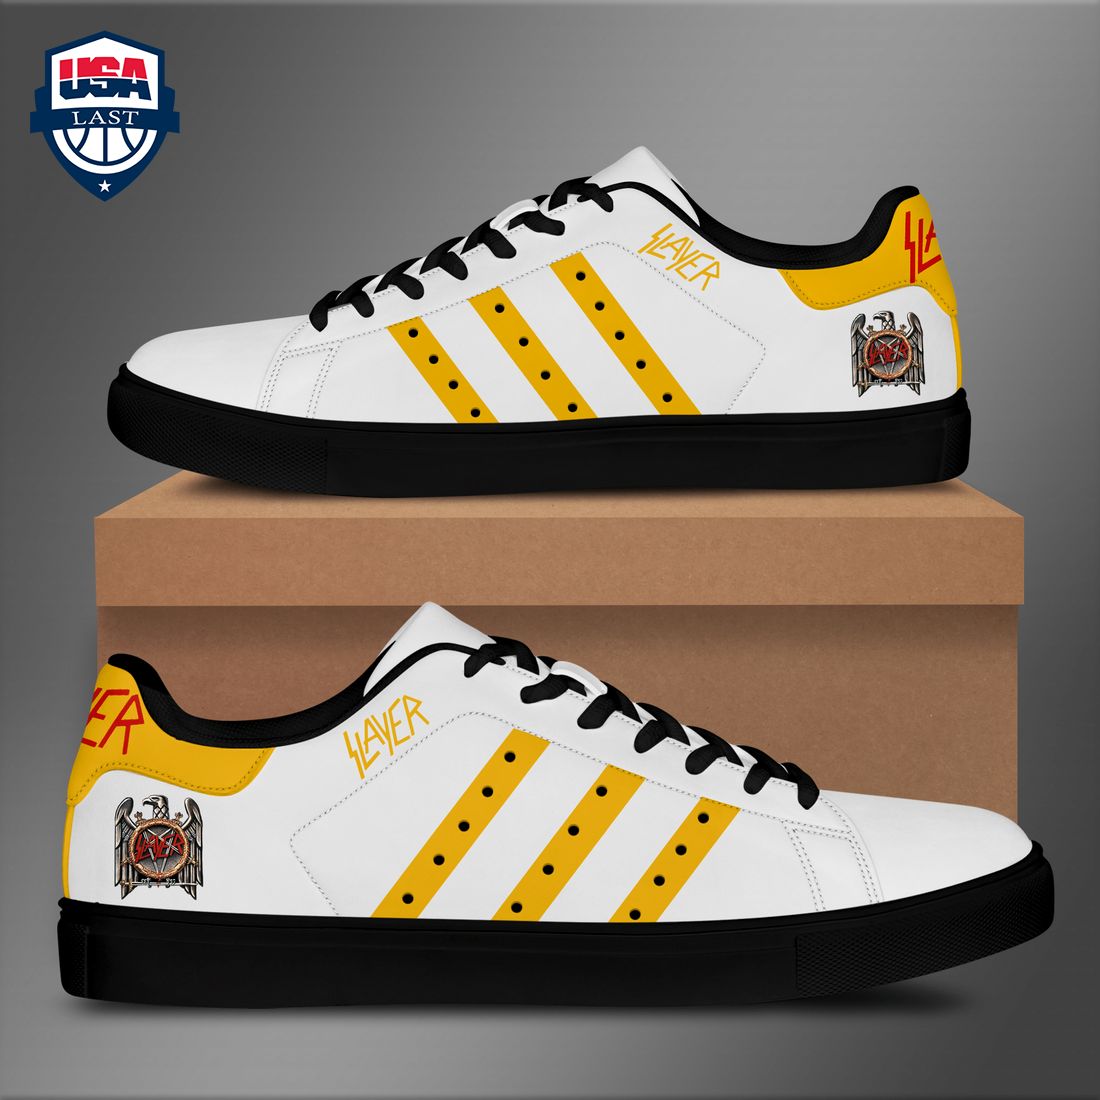 Slayer Yellow Style 2 Stan Smith Low Top Shoes - You guys complement each other